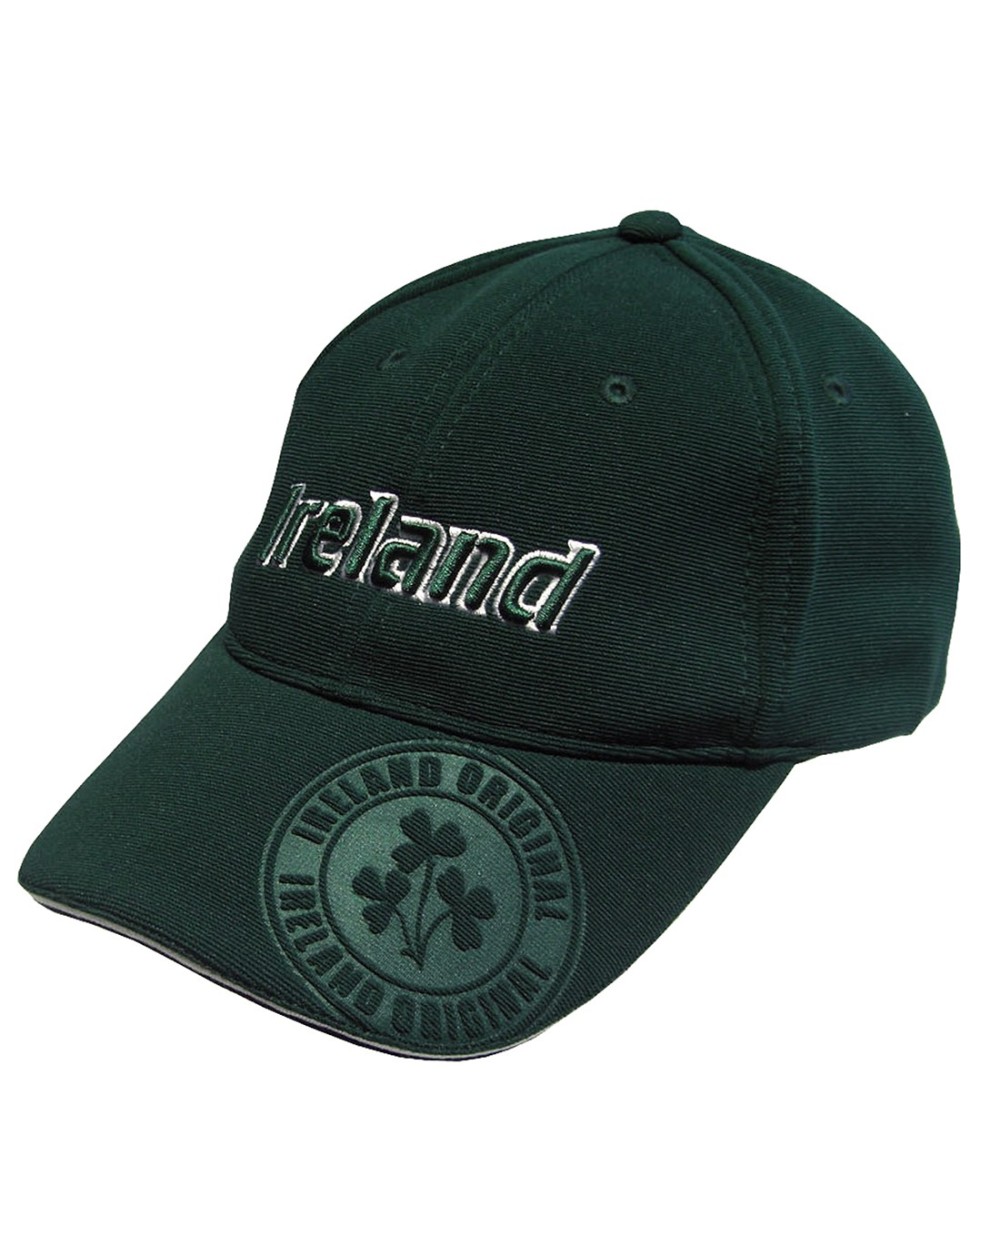 Lansdowne Sports Official Collection Bottle Green Embossed Baseball Cap